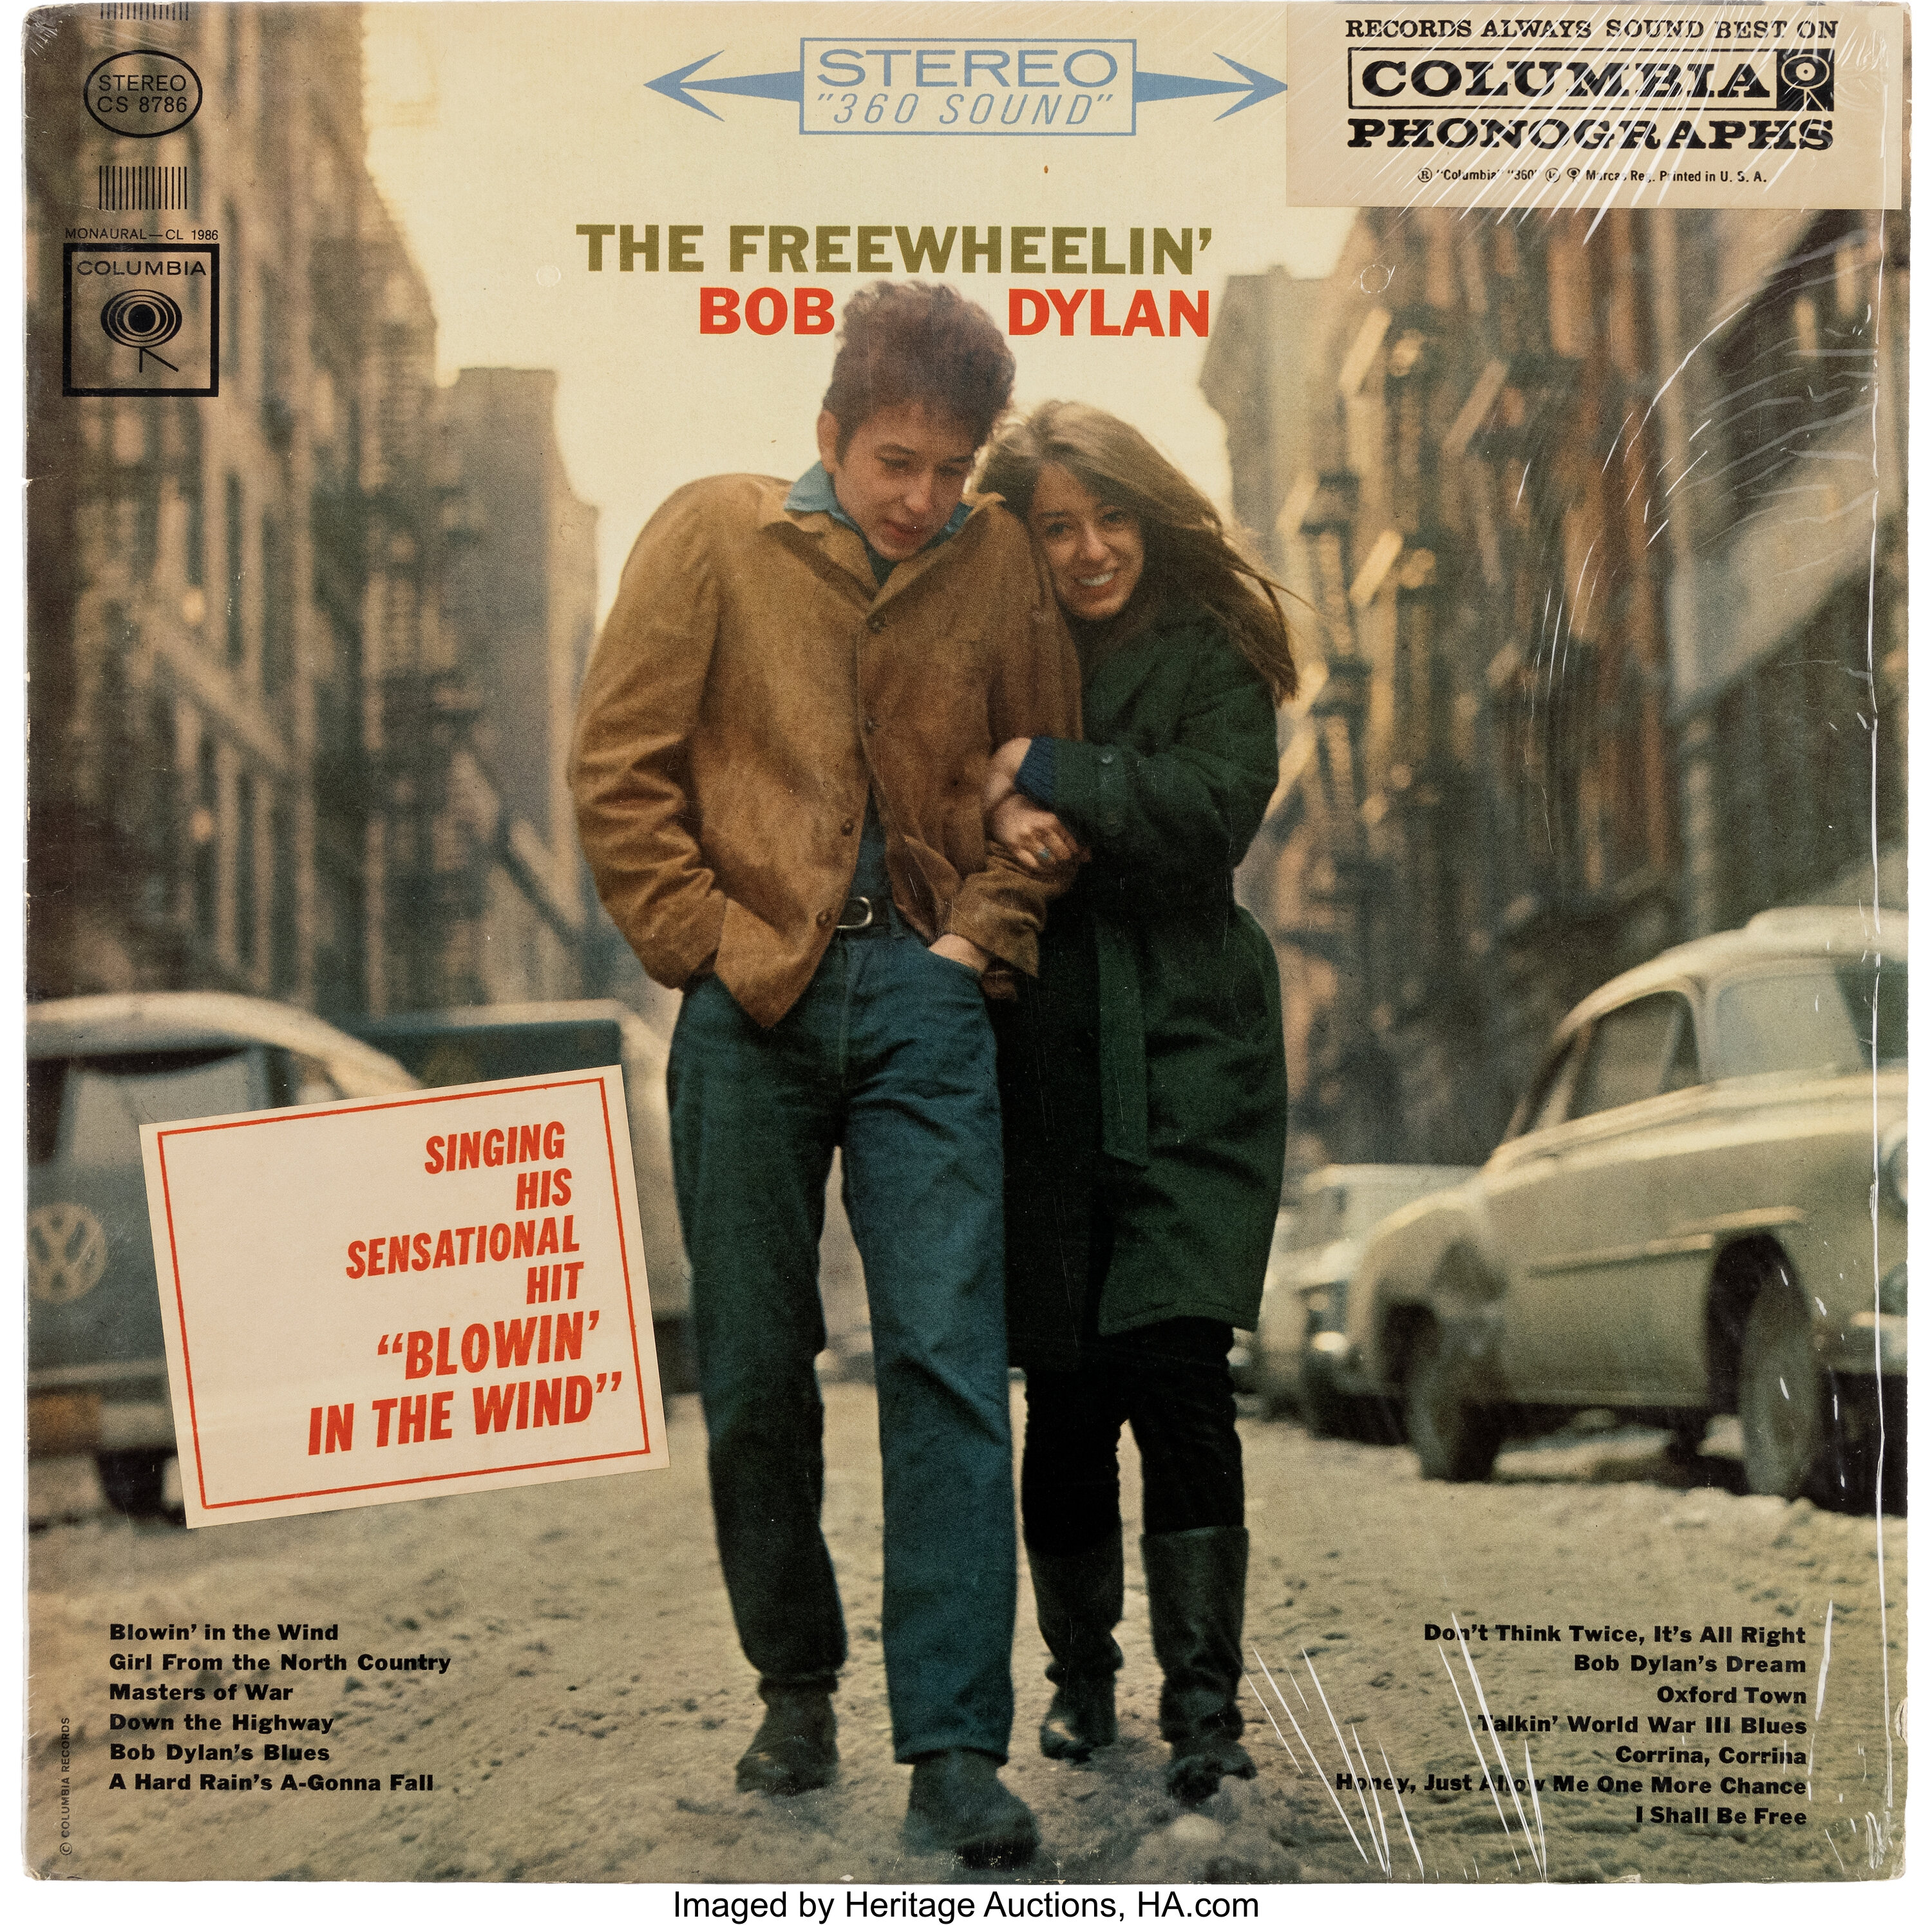 The Free Wheelin Bob Dylan Stereo album with hype stickers